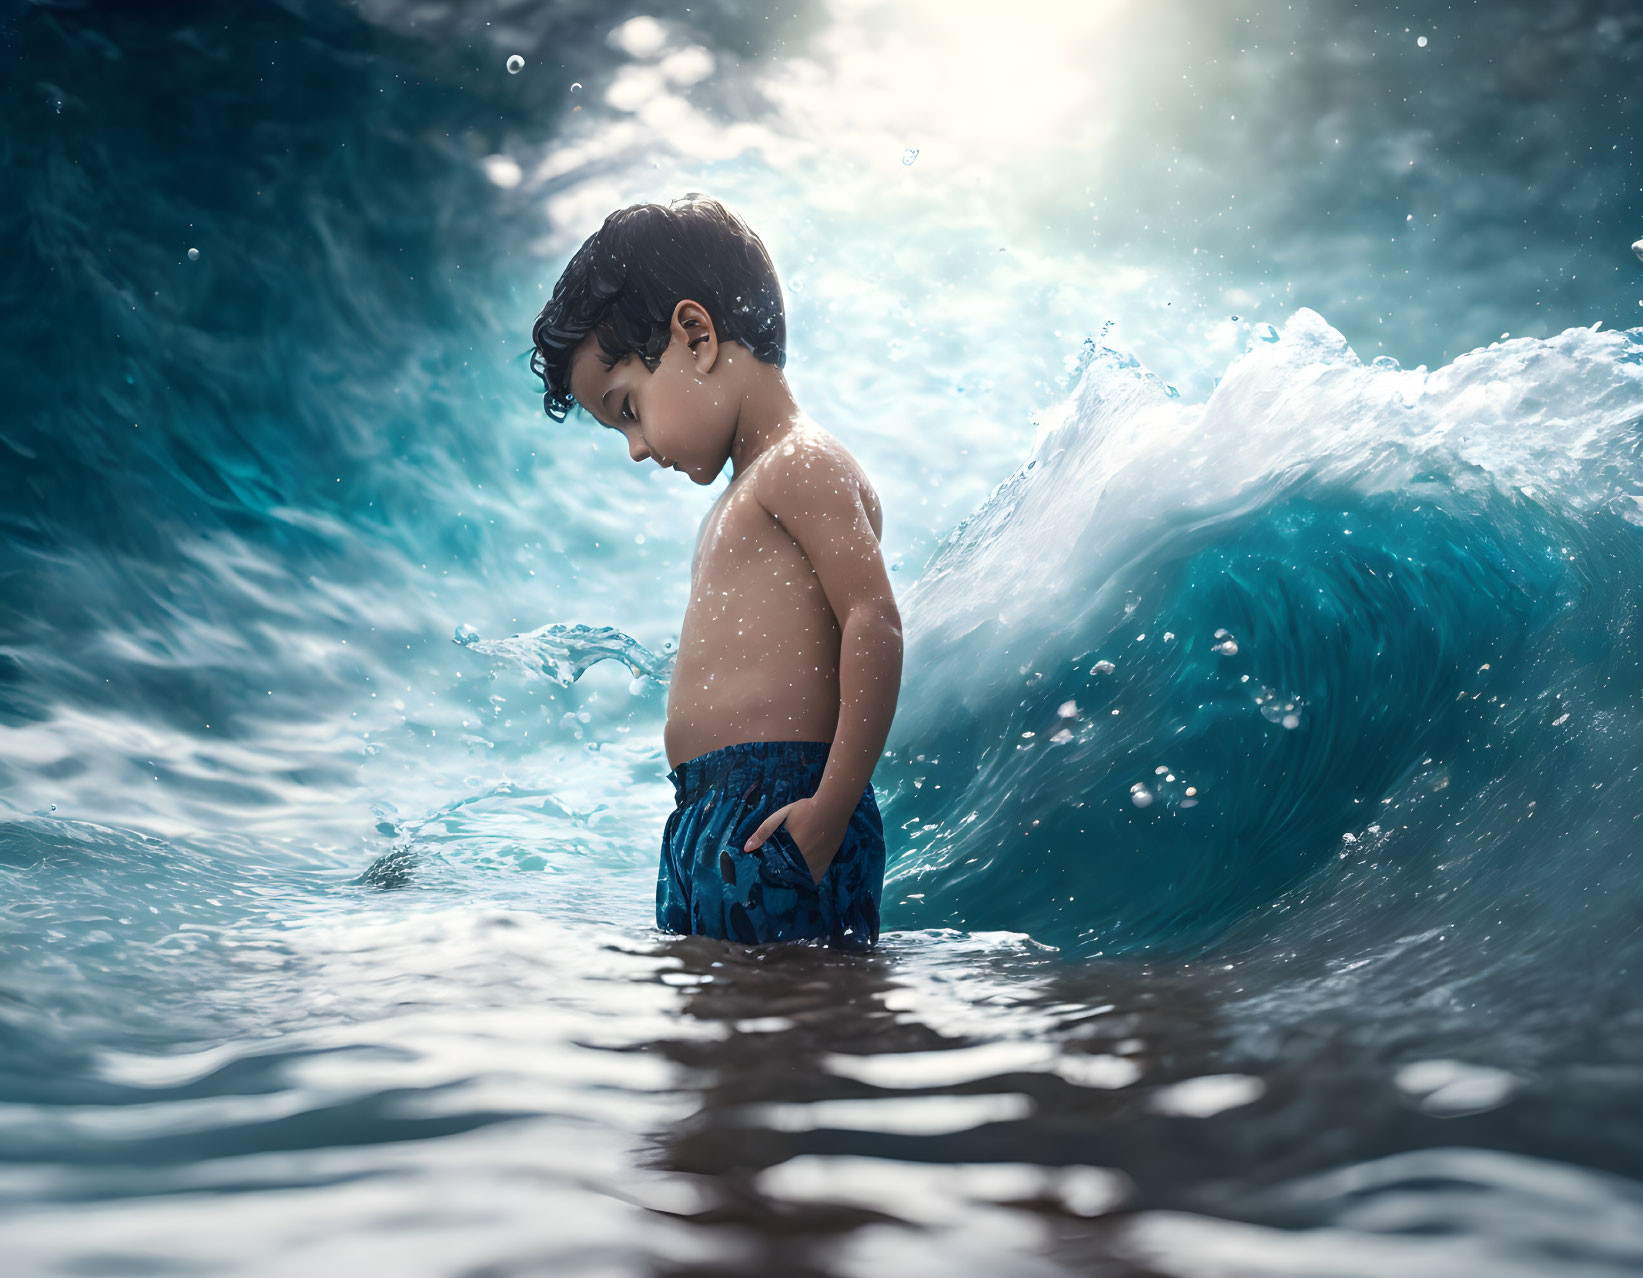 Child standing in shallow water with cresting wave under moody sky